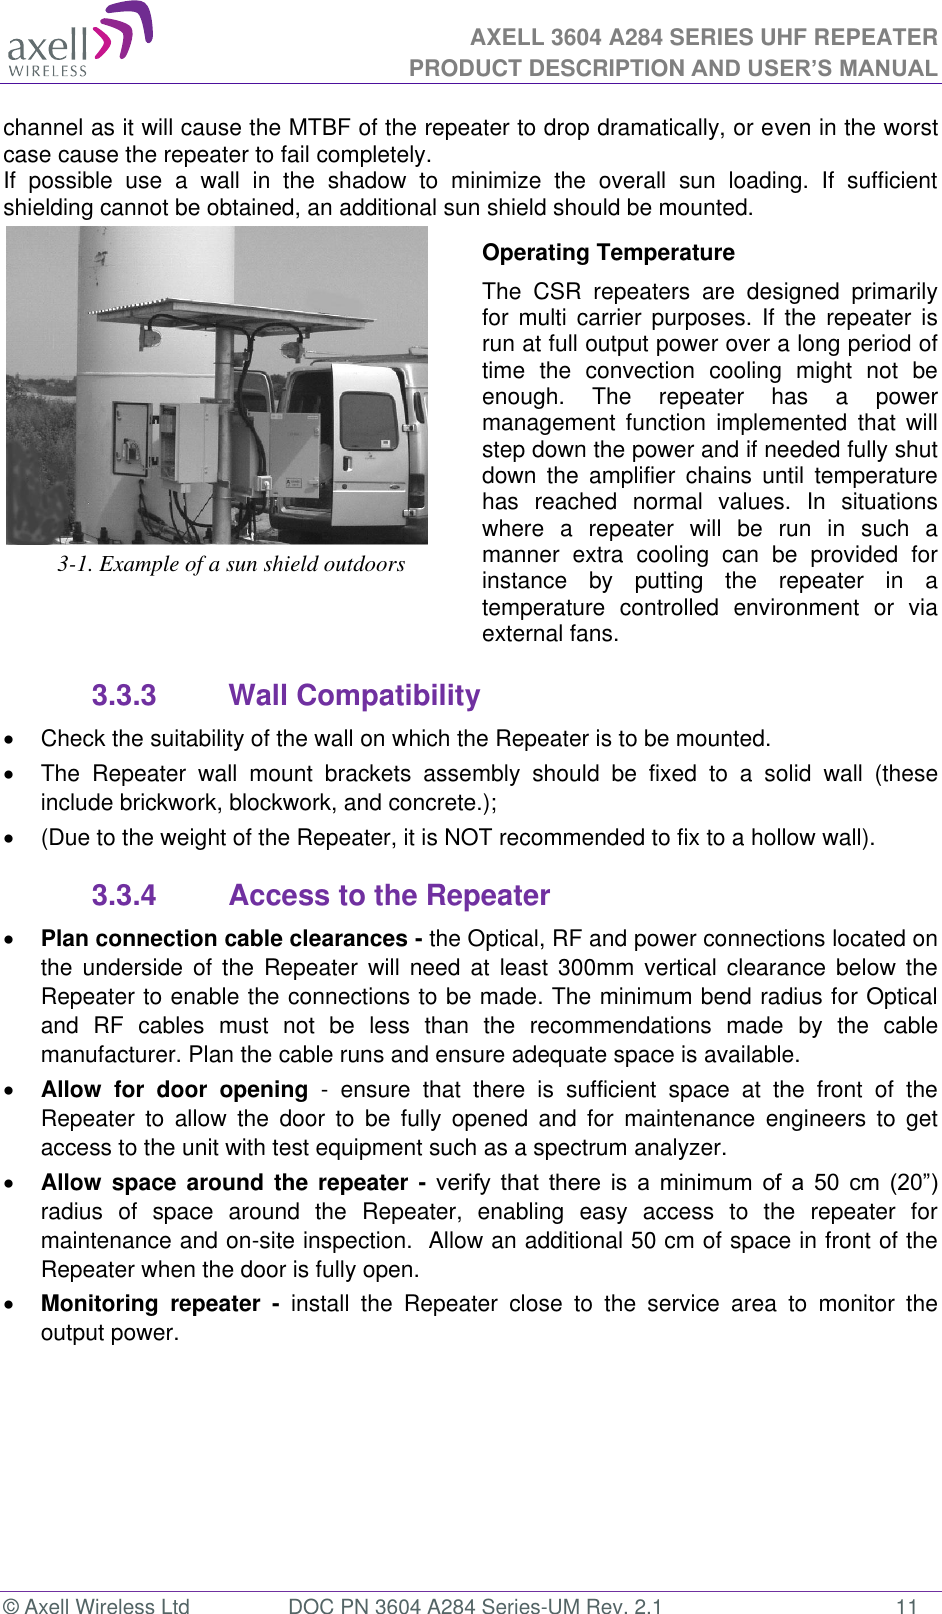 AXELL 3604 A284 SERIES UHF REPEATER PRODUCT DESCRIPTION AND USER’S MANUAL  © Axell Wireless Ltd  DOC PN 3604 A284 Series-UM Rev. 2.1  11 channel as it will cause the MTBF of the repeater to drop dramatically, or even in the worst case cause the repeater to fail completely.  If  possible  use  a  wall  in  the  shadow  to  minimize  the  overall  sun  loading.  If  sufficient shielding cannot be obtained, an additional sun shield should be mounted.   3-1. Example of a sun shield outdoors Operating Temperature The  CSR  repeaters  are  designed  primarily for  multi carrier purposes. If  the  repeater  is run at full output power over a long period of time  the  convection  cooling  might  not  be enough.  The  repeater  has  a  power management  function  implemented  that  will step down the power and if needed fully shut down  the  amplifier  chains  until temperature has  reached  normal  values.  In  situations where  a  repeater  will  be  run  in  such  a manner  extra  cooling  can  be  provided  for instance  by  putting  the  repeater  in  a temperature  controlled  environment  or  via external fans. 3.3.3  Wall Compatibility   Check the suitability of the wall on which the Repeater is to be mounted.    The  Repeater  wall  mount  brackets  assembly  should  be  fixed  to  a  solid  wall  (these include brickwork, blockwork, and concrete.);    (Due to the weight of the Repeater, it is NOT recommended to fix to a hollow wall). 3.3.4  Access to the Repeater  Plan connection cable clearances - the Optical, RF and power connections located on the  underside  of  the  Repeater  will need  at  least  300mm vertical  clearance  below  the Repeater to enable the connections to be made. The minimum bend radius for Optical and  RF  cables  must  not  be  less  than  the  recommendations  made  by  the  cable manufacturer. Plan the cable runs and ensure adequate space is available.  Allow  for  door  opening  -  ensure  that  there  is  sufficient  space  at  the  front  of  the Repeater  to  allow  the  door  to  be  fully  opened  and  for  maintenance  engineers  to  get access to the unit with test equipment such as a spectrum analyzer.   Allow  space around the  repeater  -            radius  of  space  around  the  Repeater,  enabling  easy  access  to  the  repeater  for maintenance and on-site inspection.  Allow an additional 50 cm of space in front of the Repeater when the door is fully open.  Monitoring  repeater  -  install  the  Repeater  close  to  the  service  area  to  monitor  the output power.  